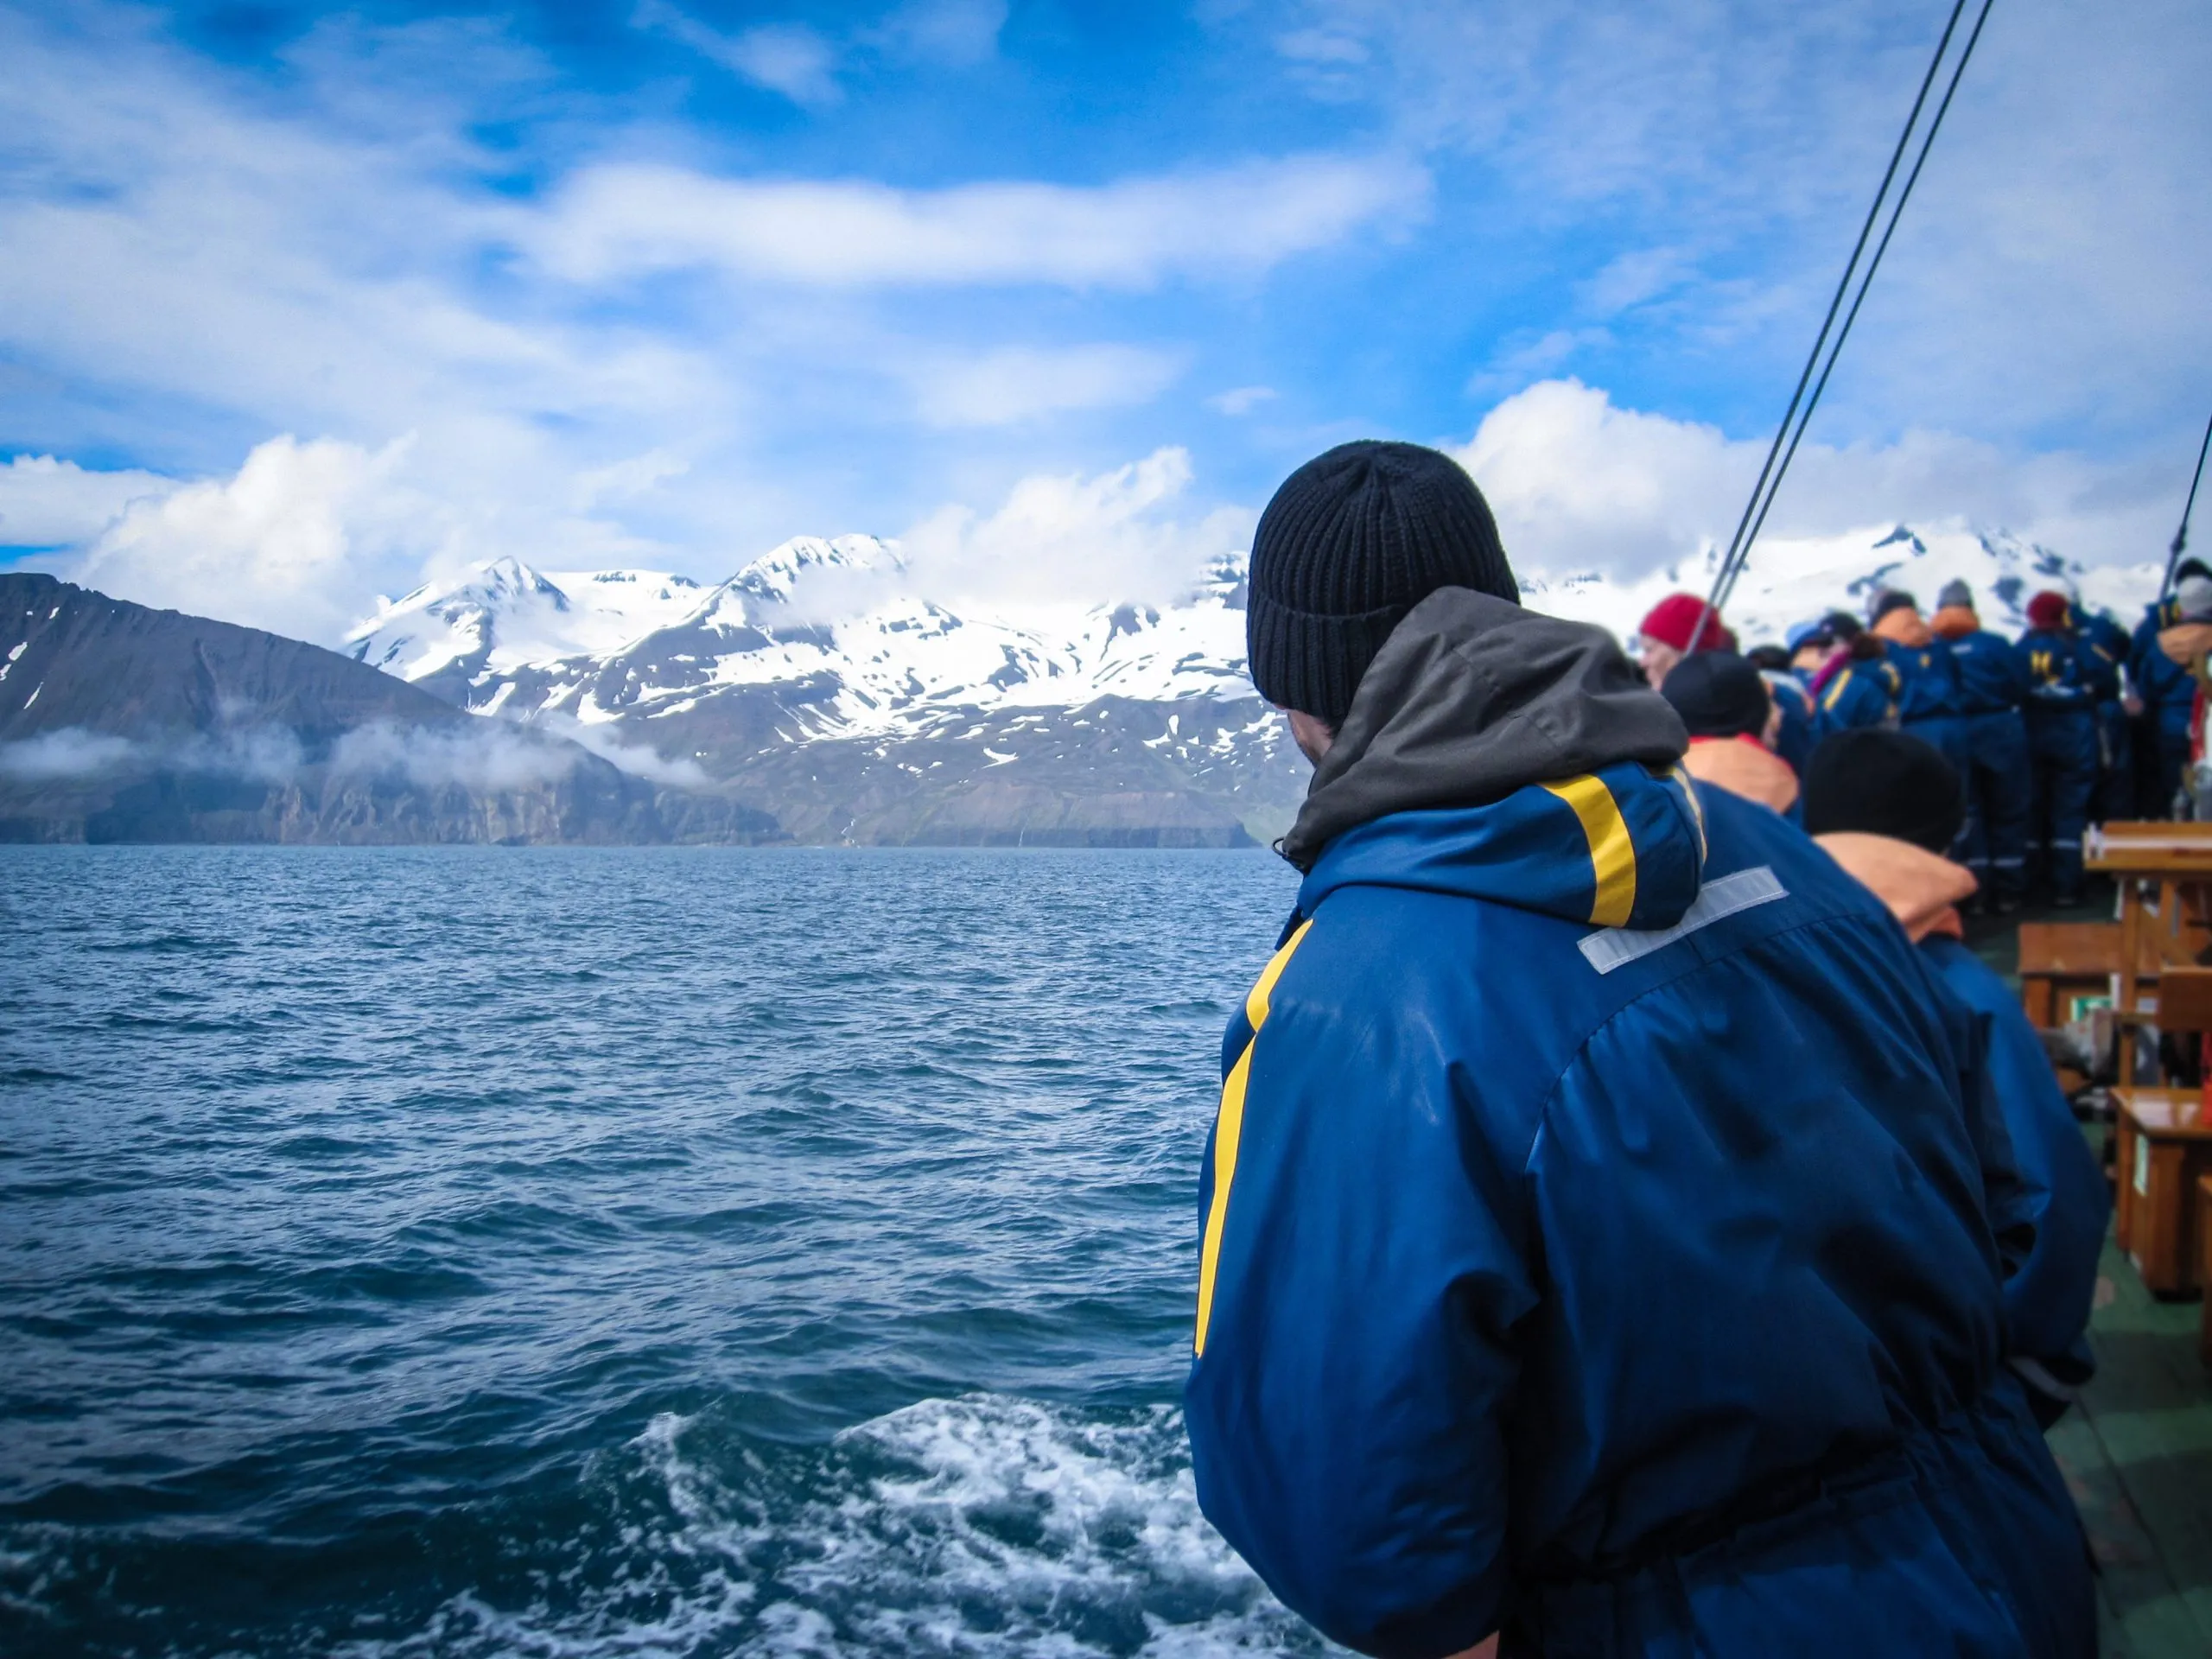 People on a eco-friendly whale watching ship in Husavik, on the north coast of Iceland